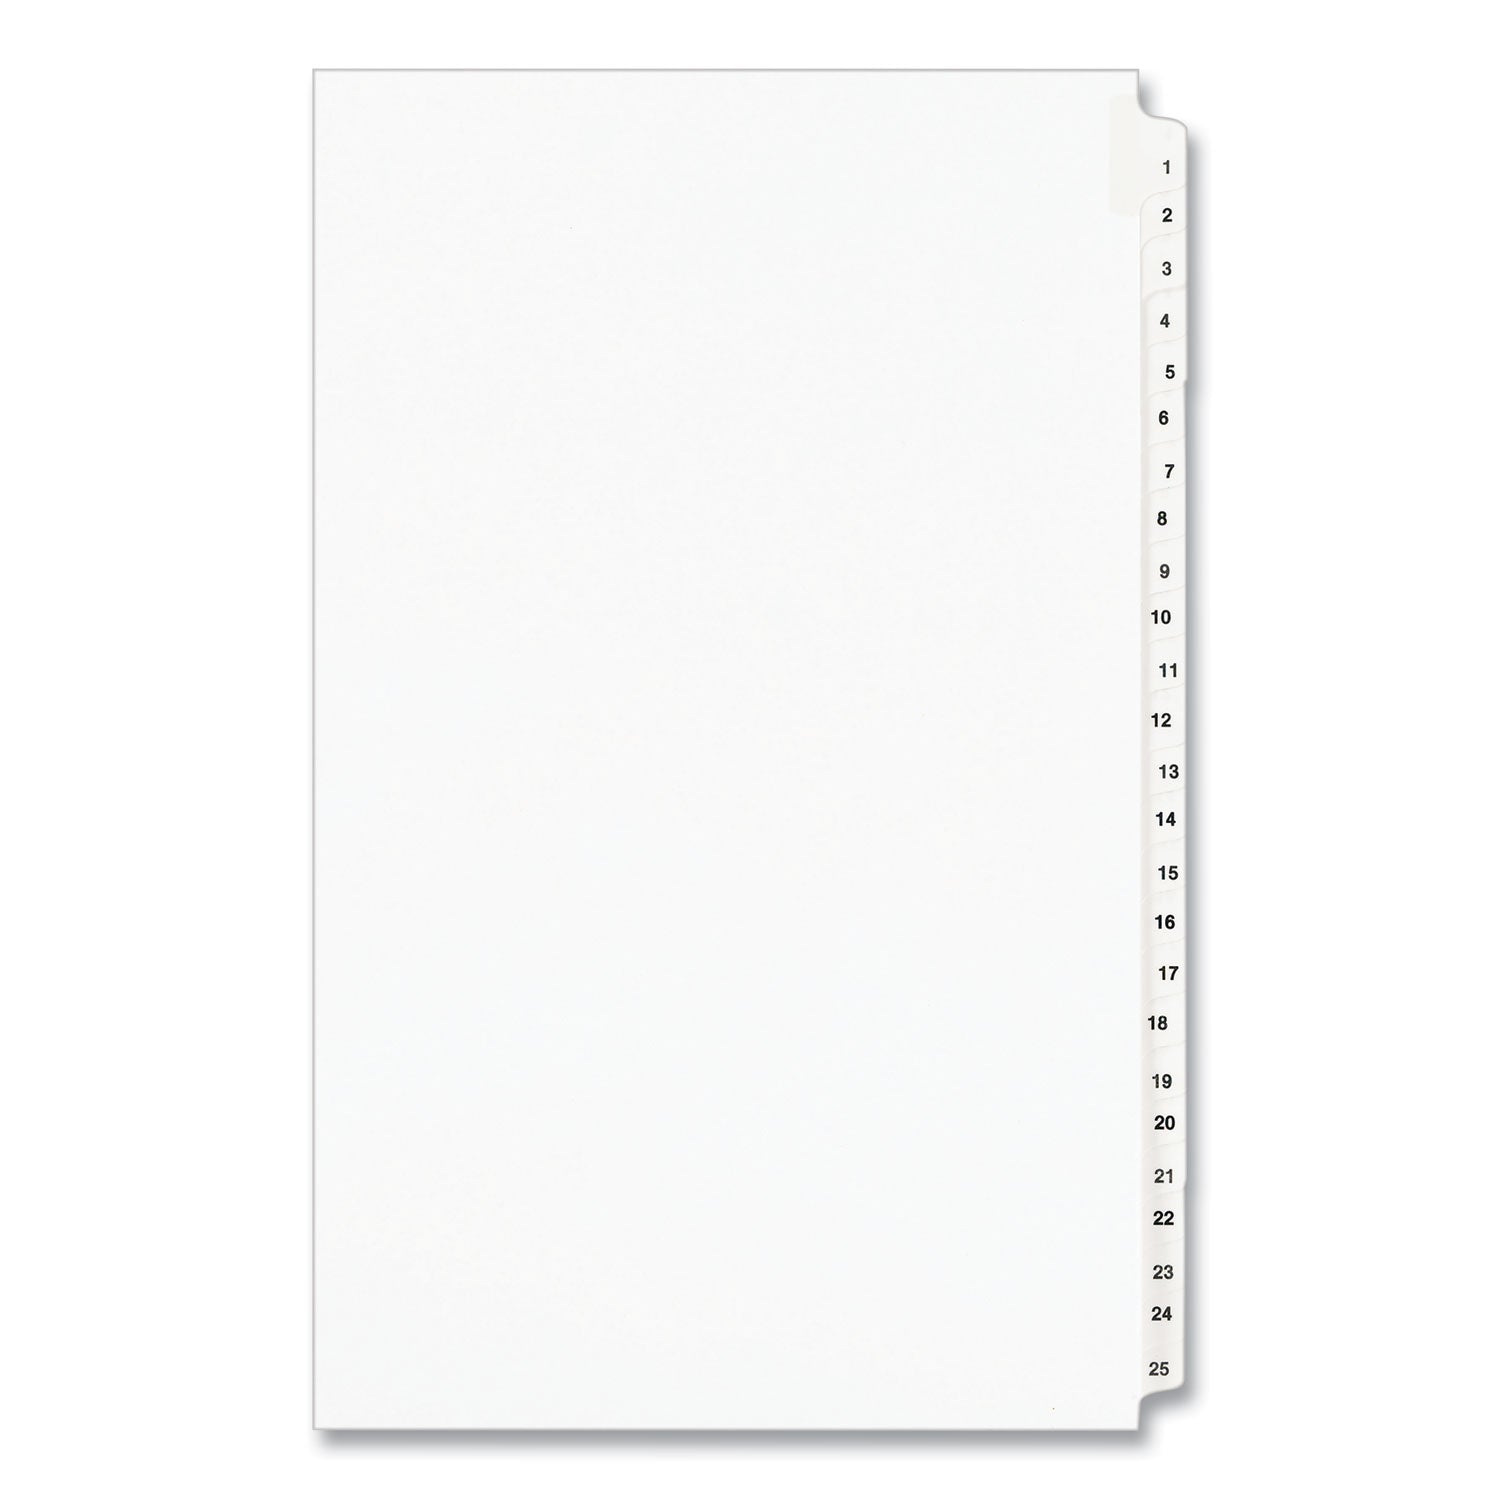 Preprinted Legal Exhibit Side Tab Index Dividers, Avery Style, 25-Tab, 1 to 25, 14 x 8.5, White, 1 Set, (1430) - 